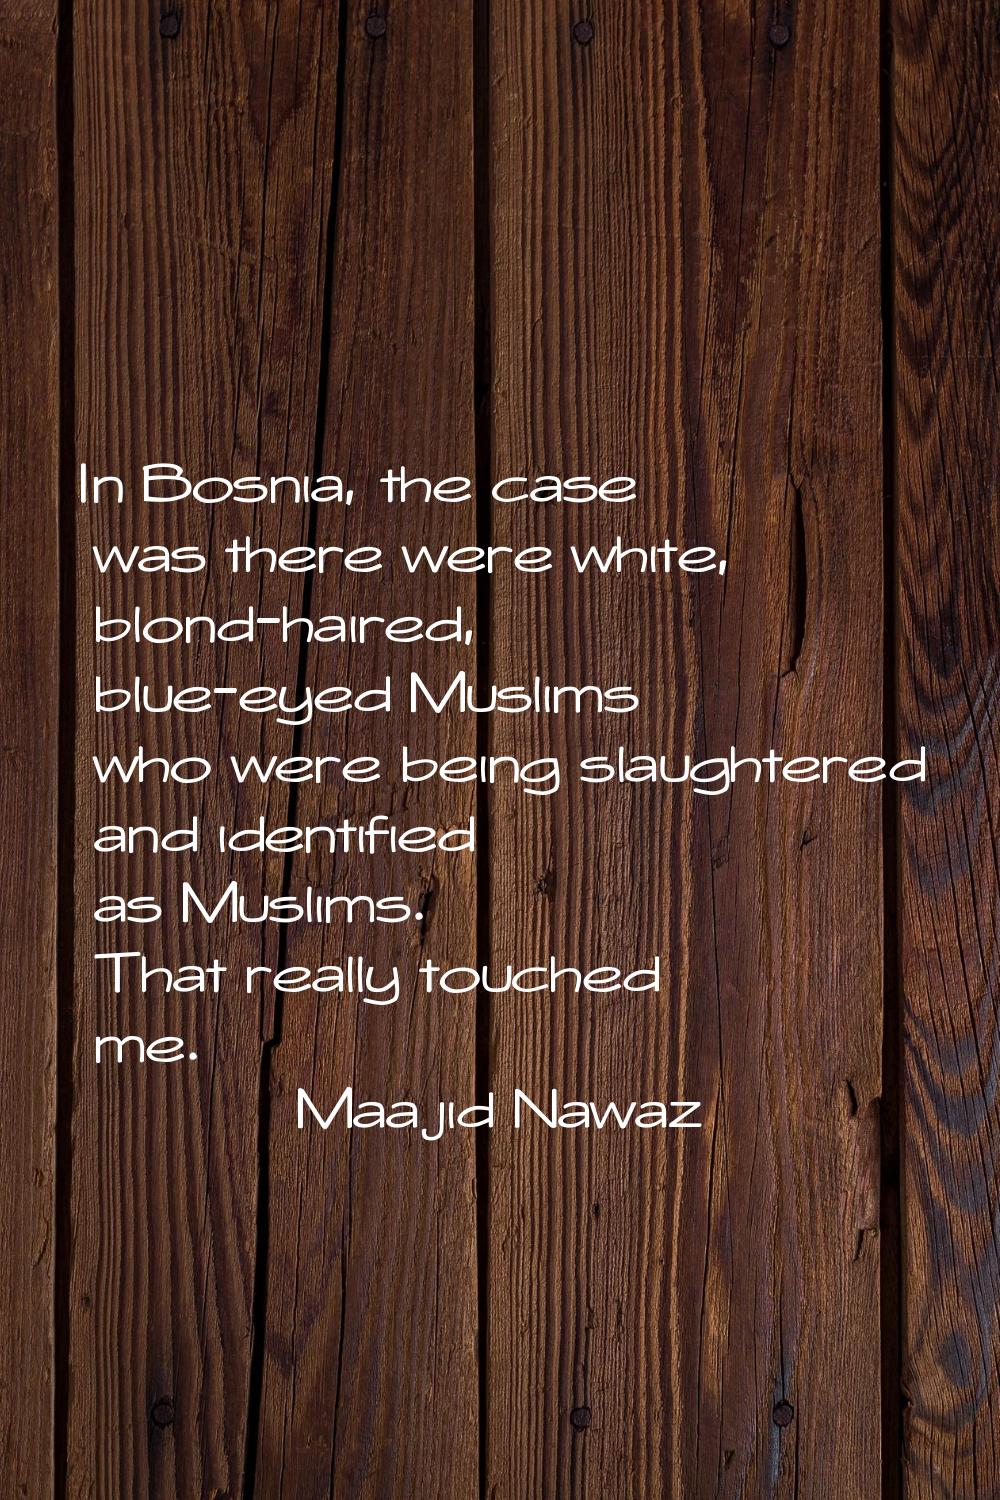 In Bosnia, the case was there were white, blond-haired, blue-eyed Muslims who were being slaughtere